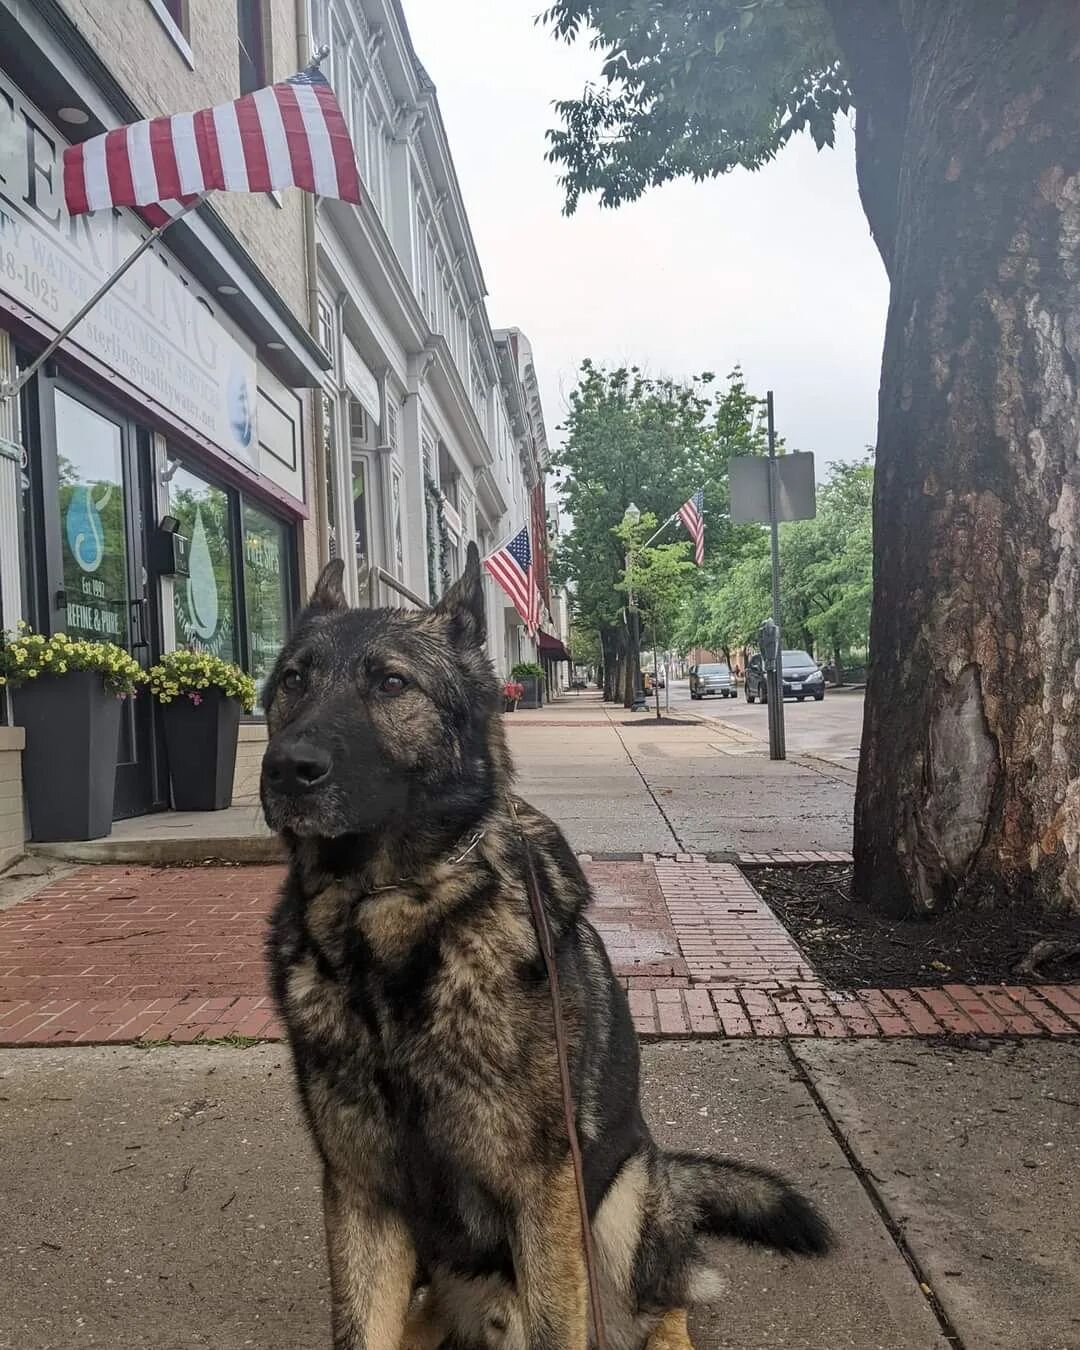 🇺🇲🇺🇲🇺🇲Happy Flag Day! 🇺🇲🇺🇲🇺🇲

Check out @lostmountaingroup Alum- retired MWD Max as he poses for pictures in front of the flags along Main Street in Westminster while on a morning run with his hooman! 

Fun Fact- Flag Day is a celebration